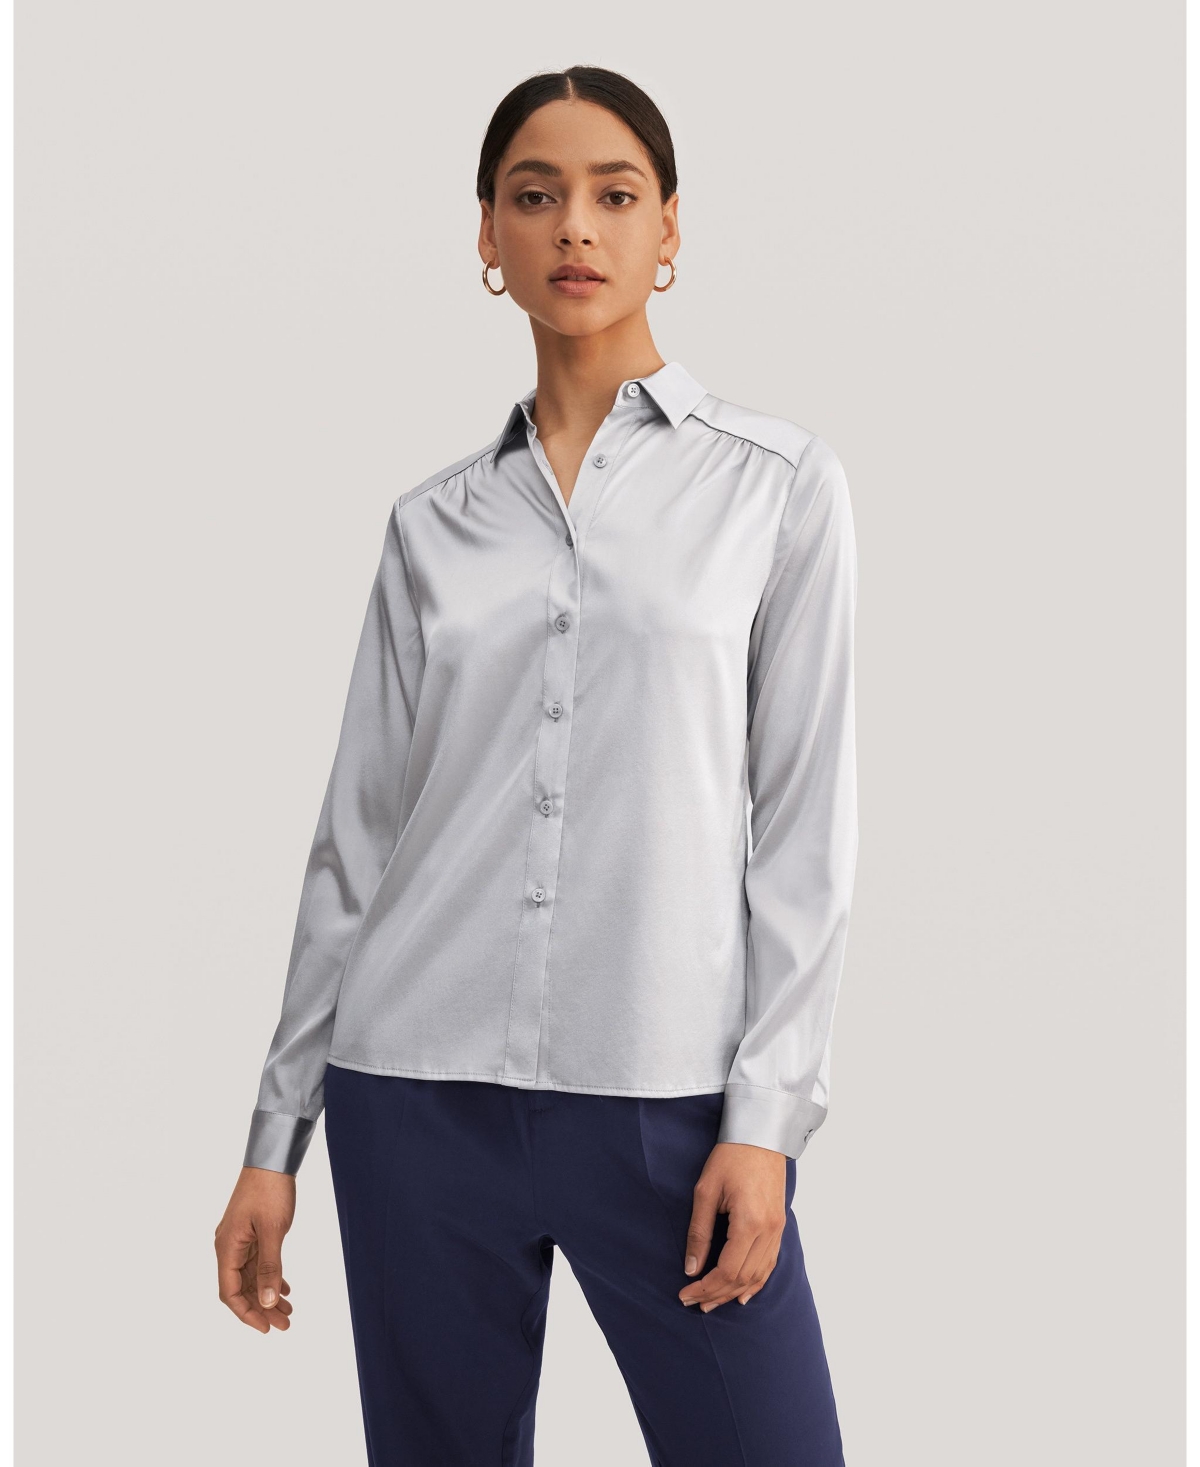 Women's Long Sleeves Collared Silk Blouse - Silver